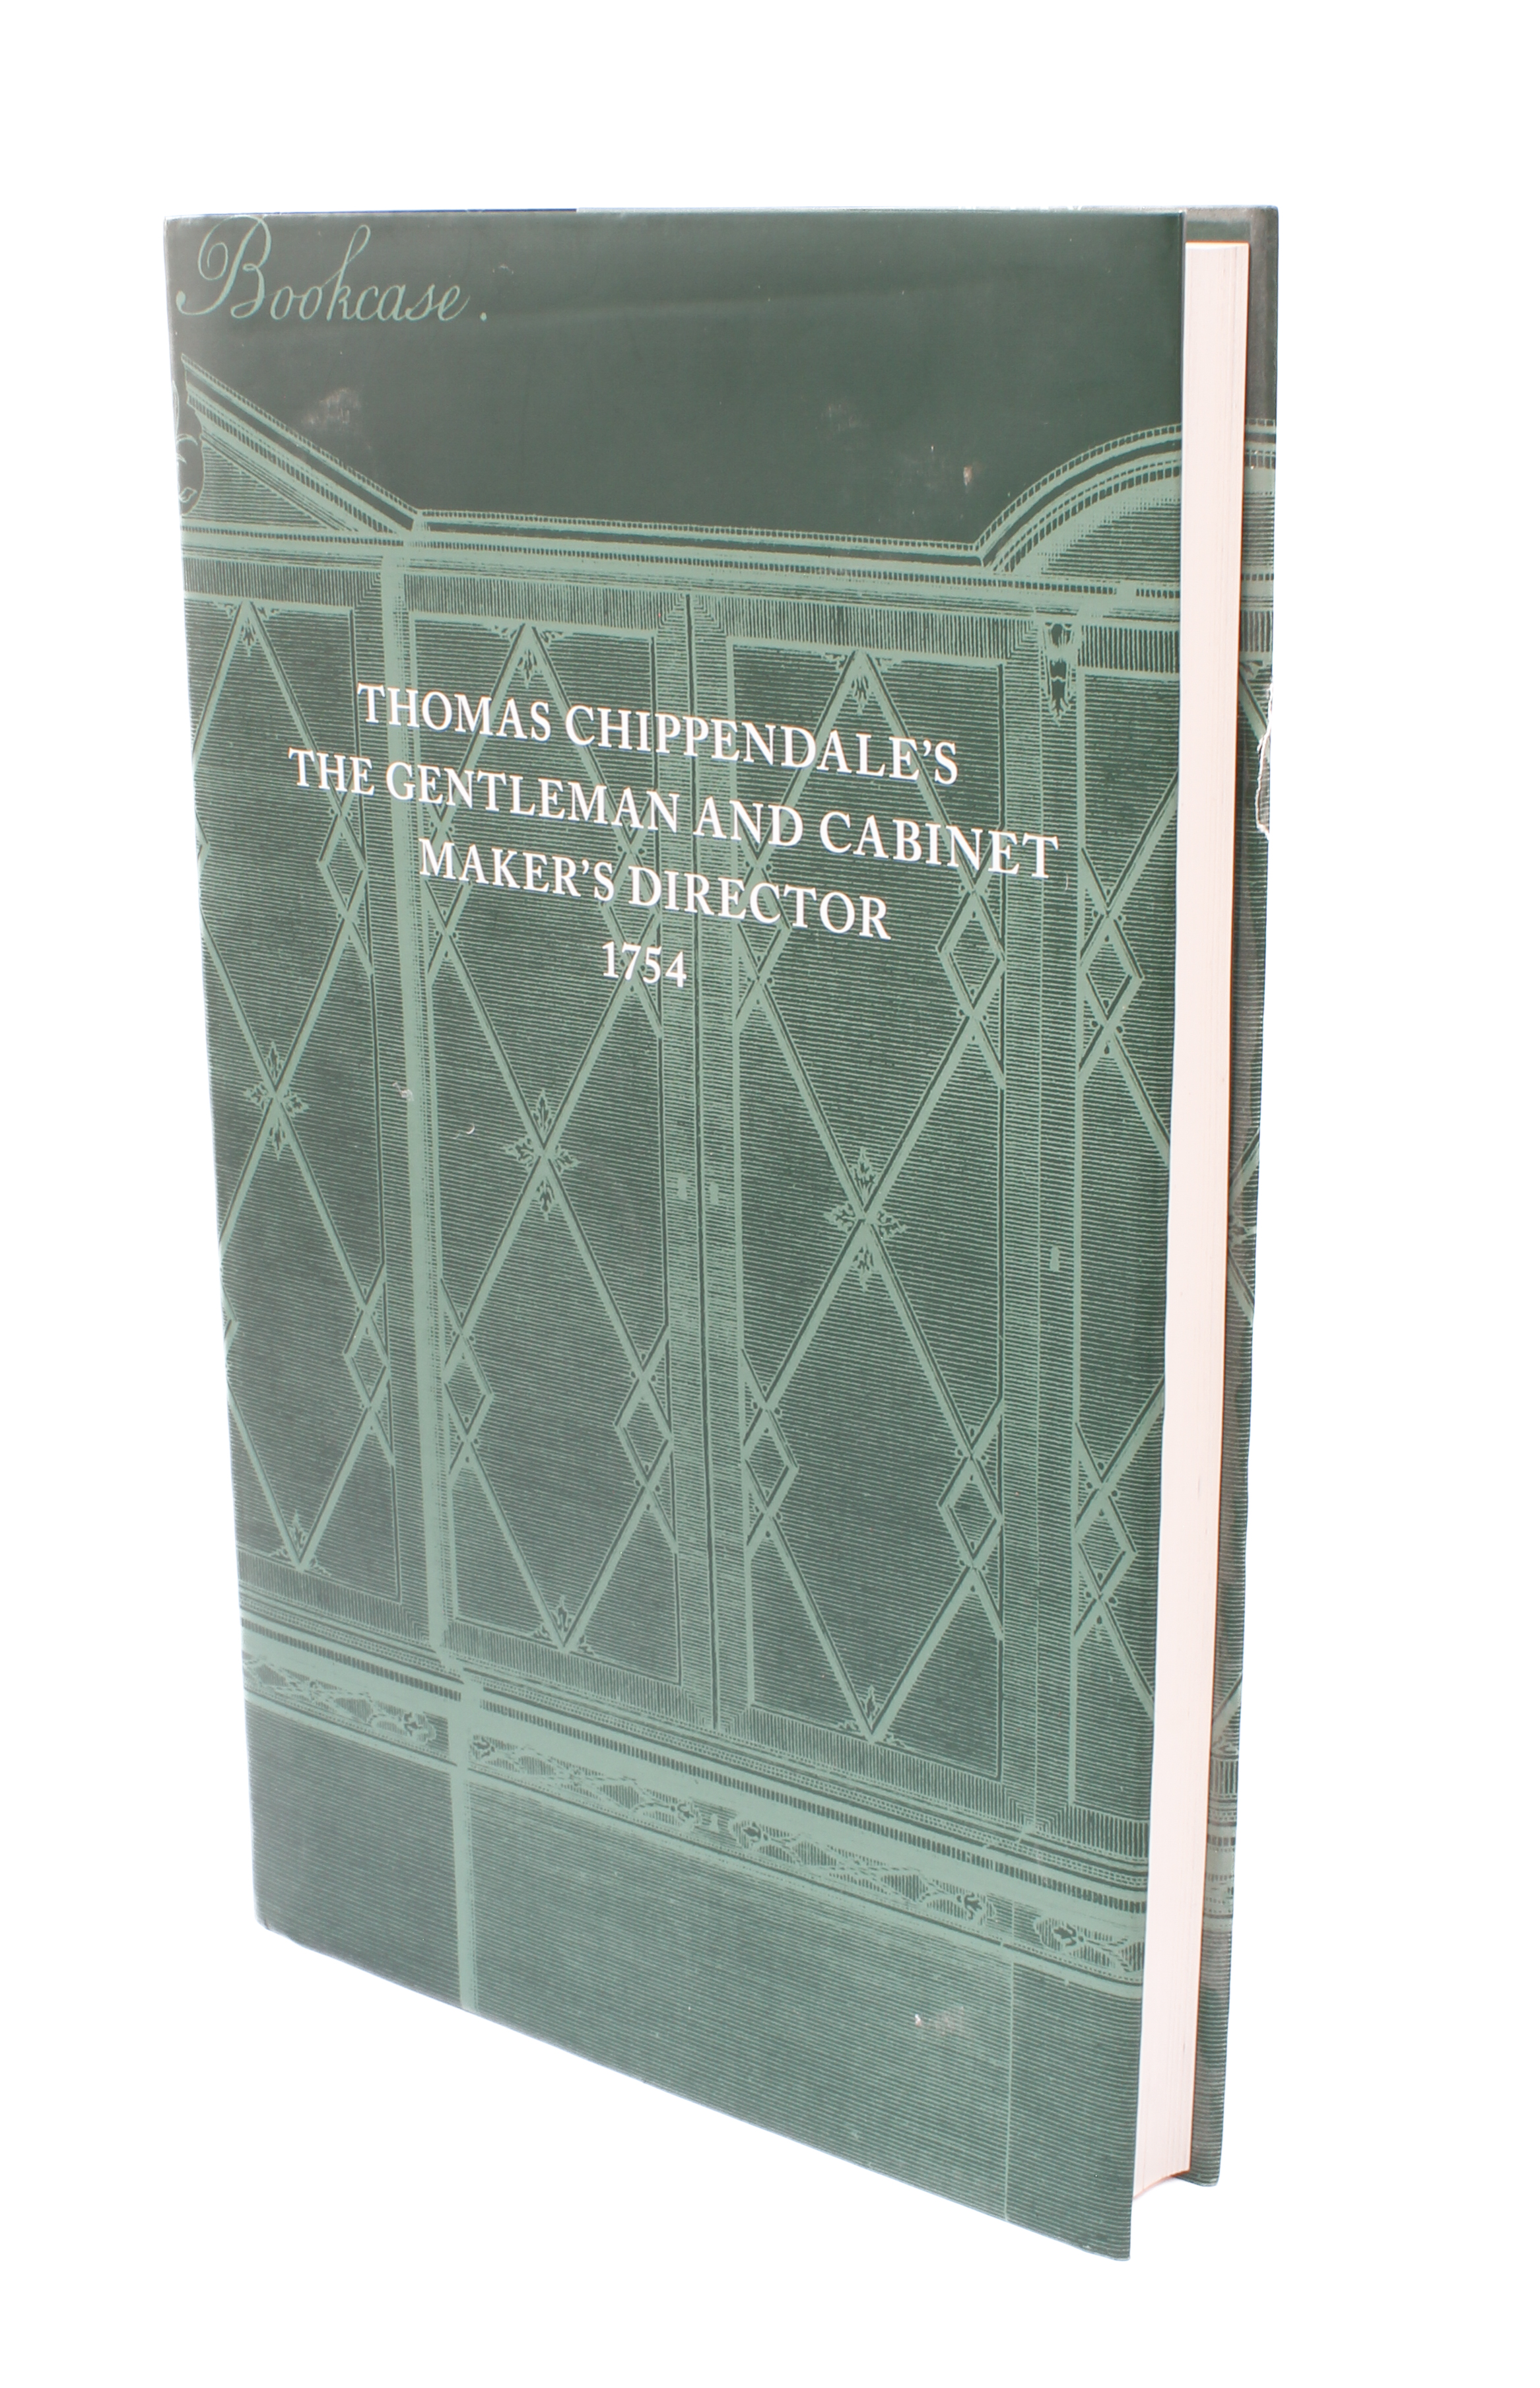 The 250th anniversary facsimile edition of Thomas Chippendale's 'The Gentleman and Cabinet Maker's